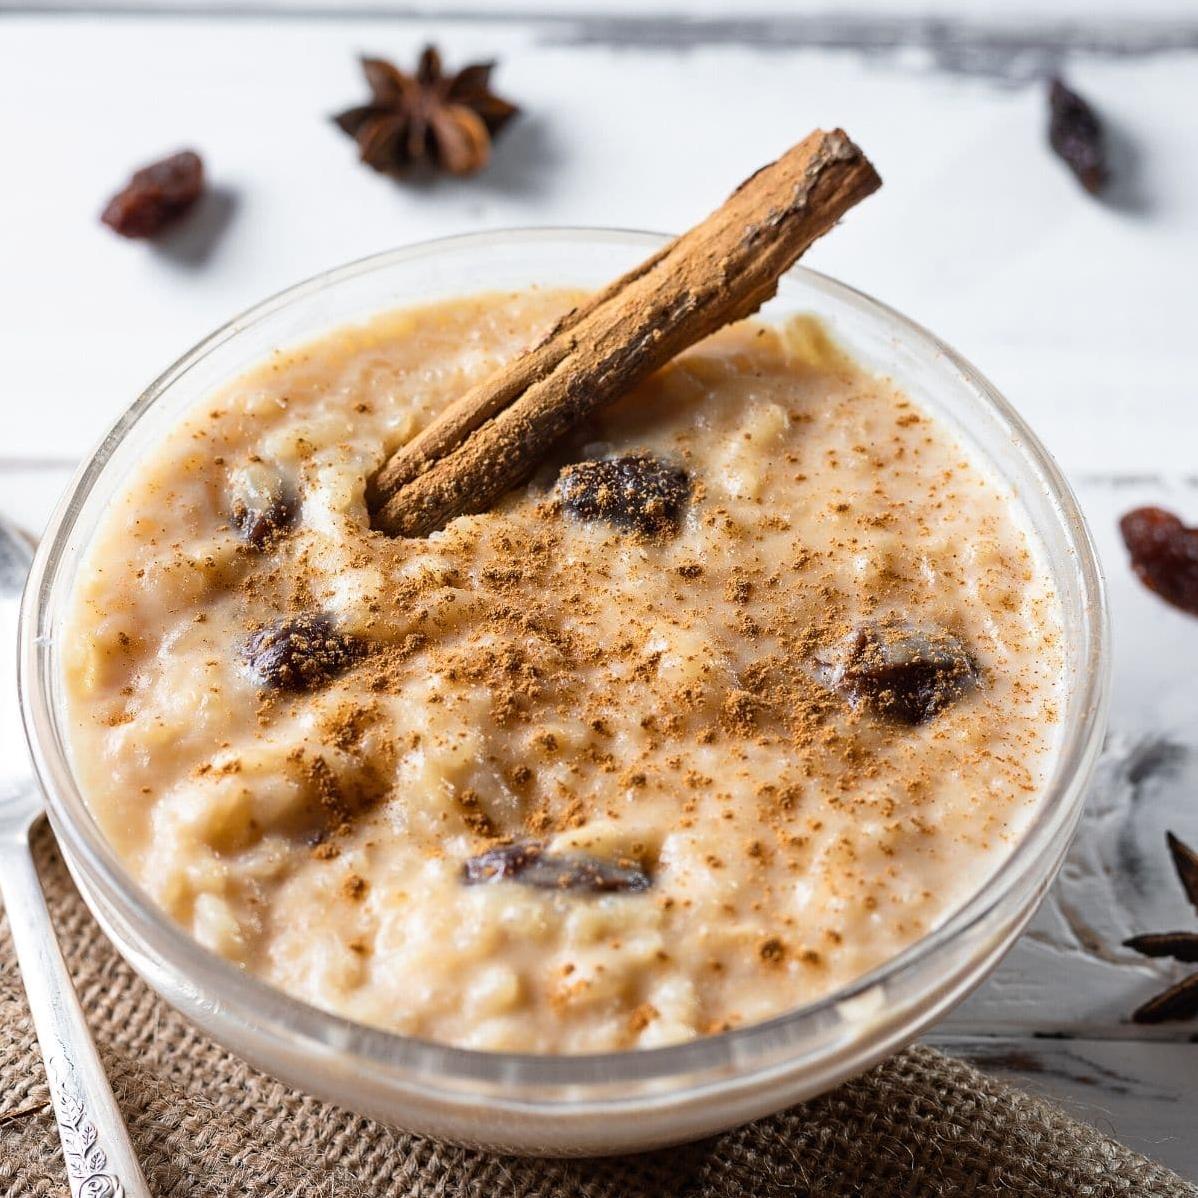  Creamy and sweet, this Arroz Con Dulce will melt in your mouth!